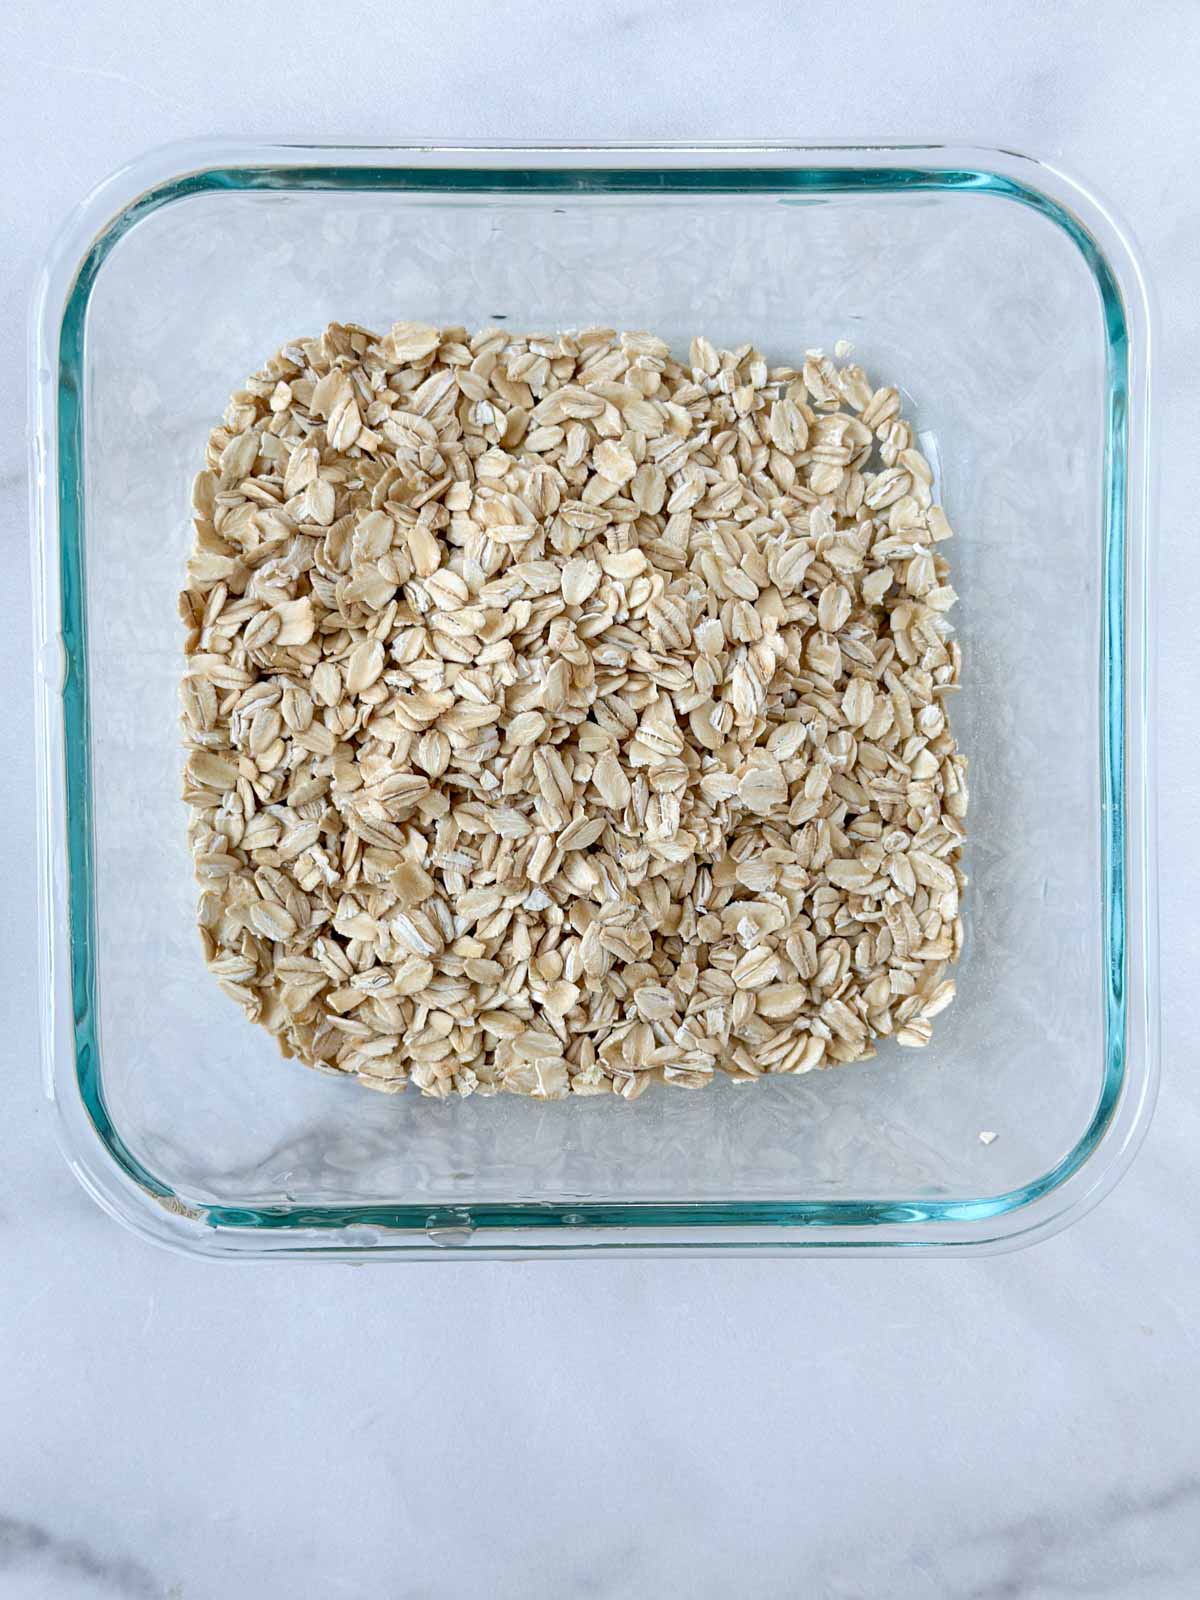 Rolled oats in a bowl.